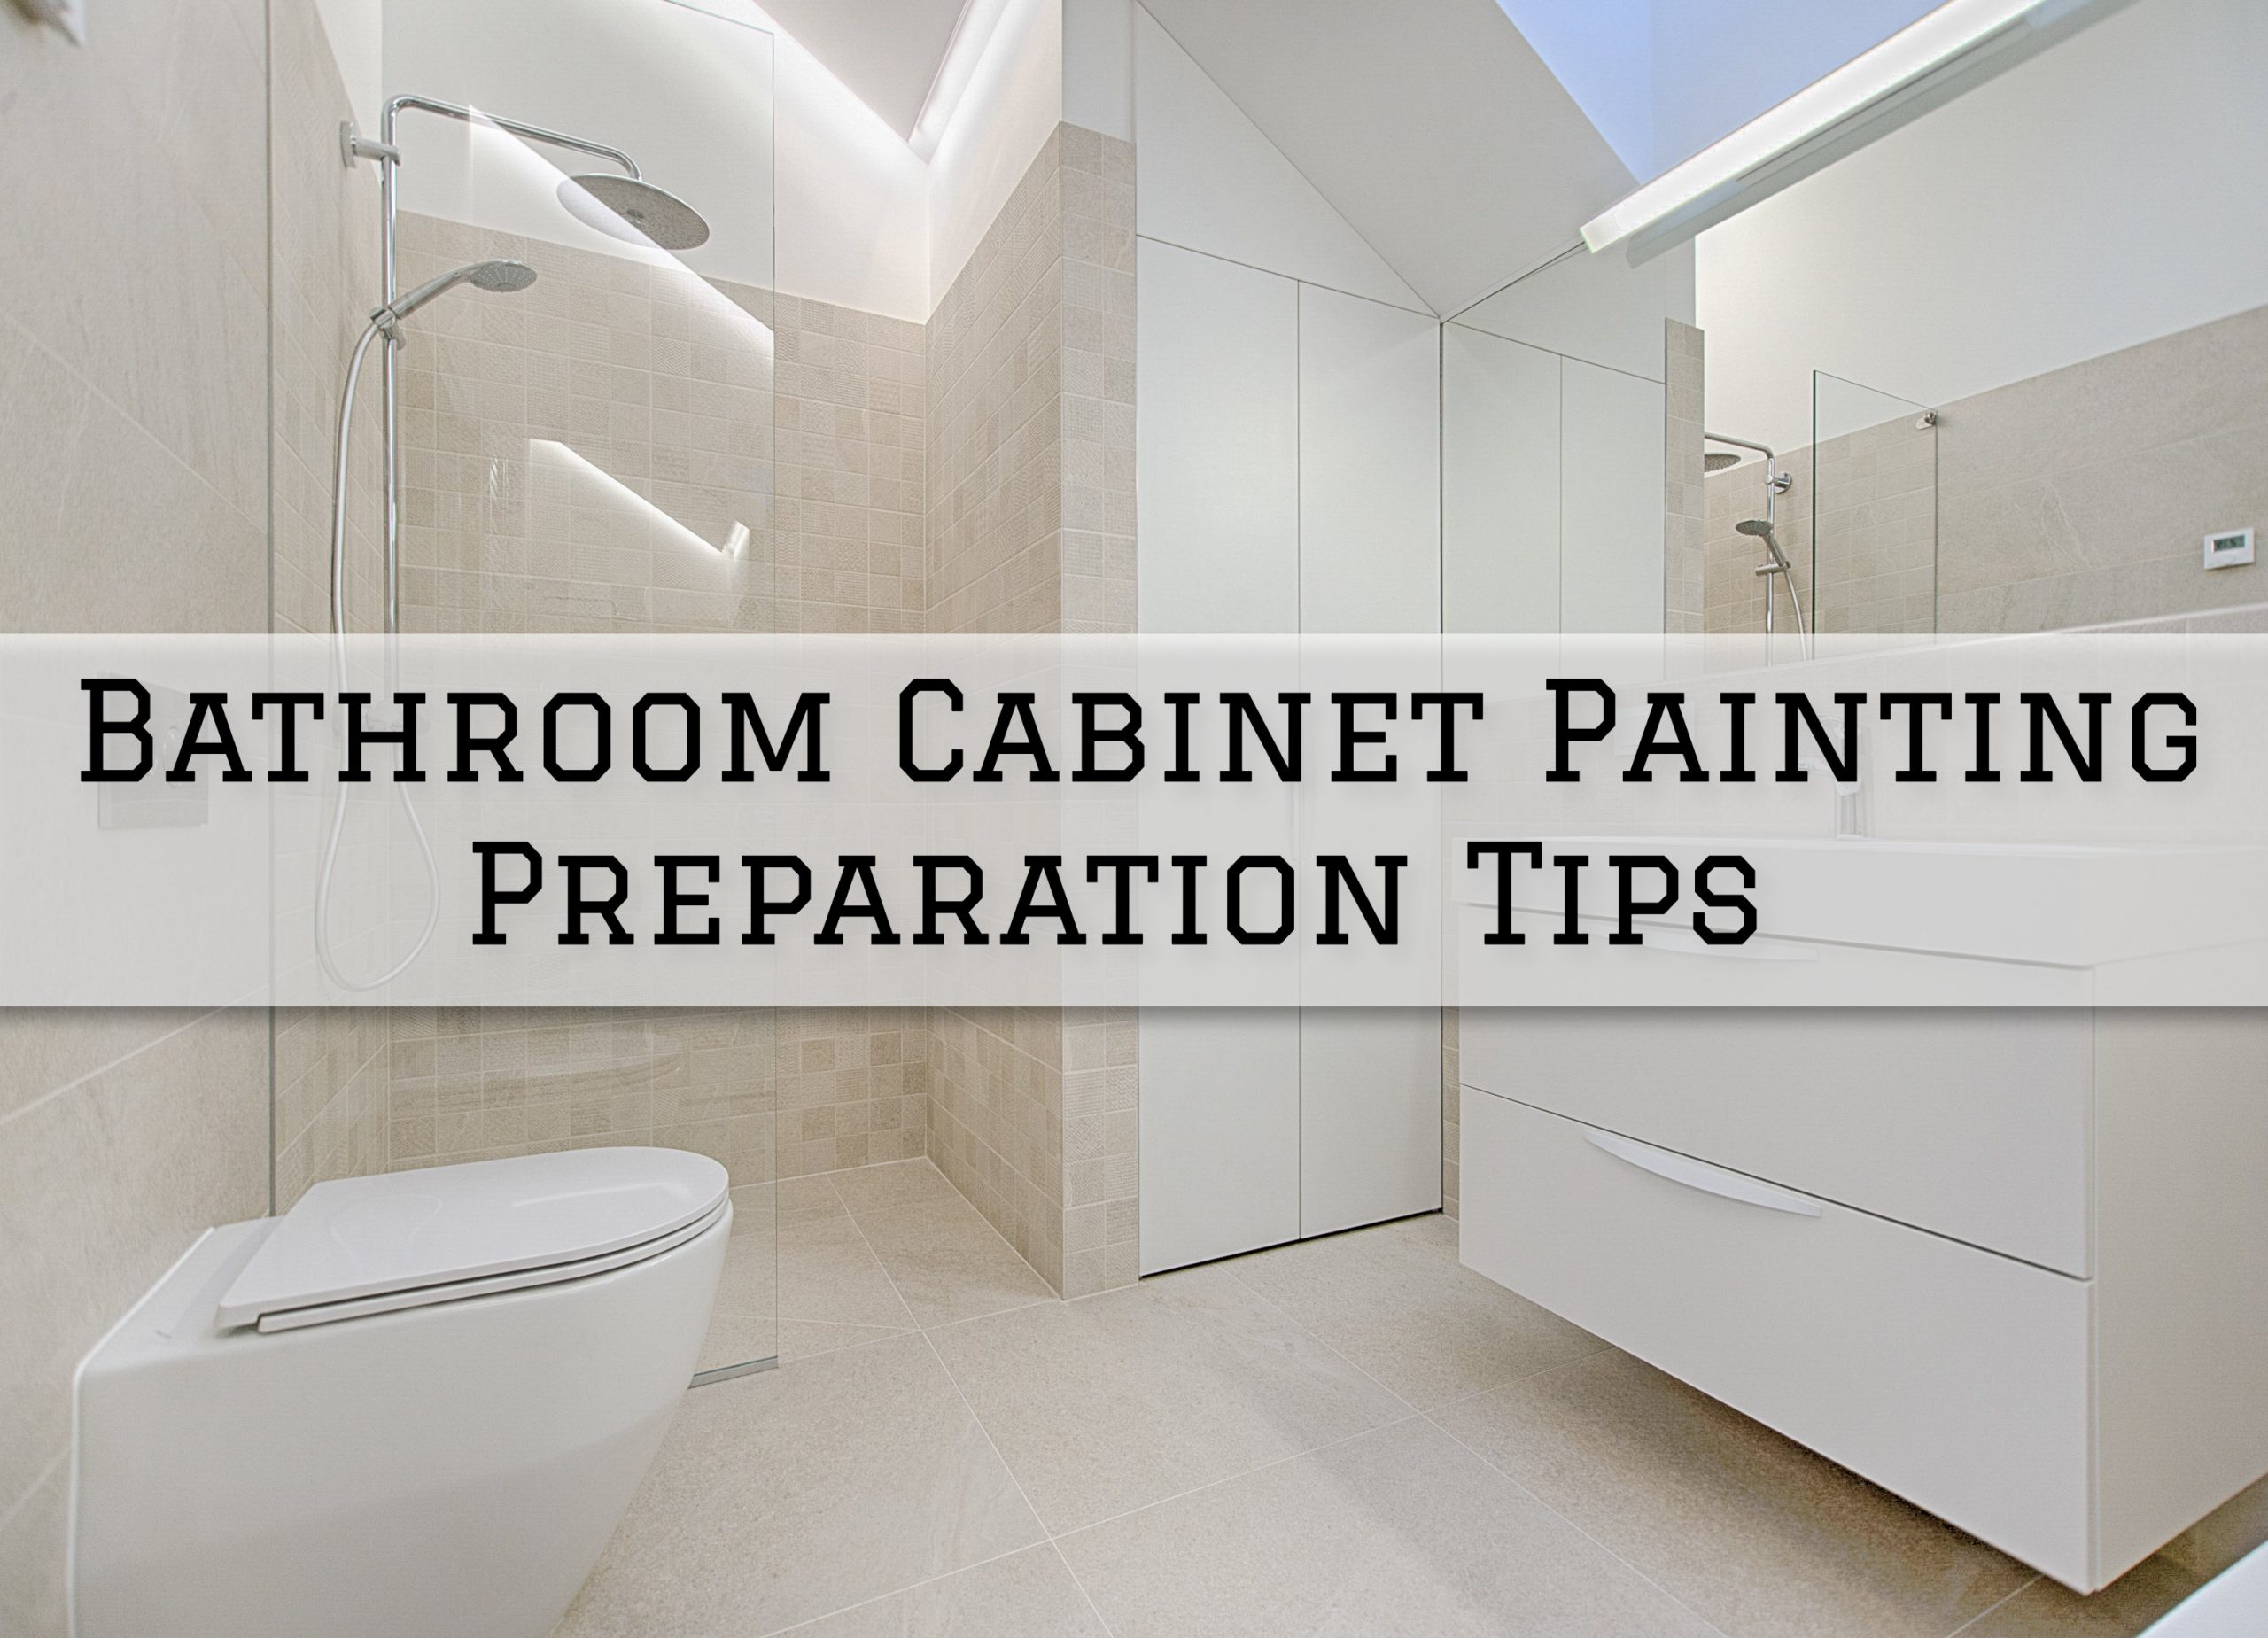 2022-08-05 Serious Business Painting Prospect KY Bathroom Cabinet Painting Preparation Tips